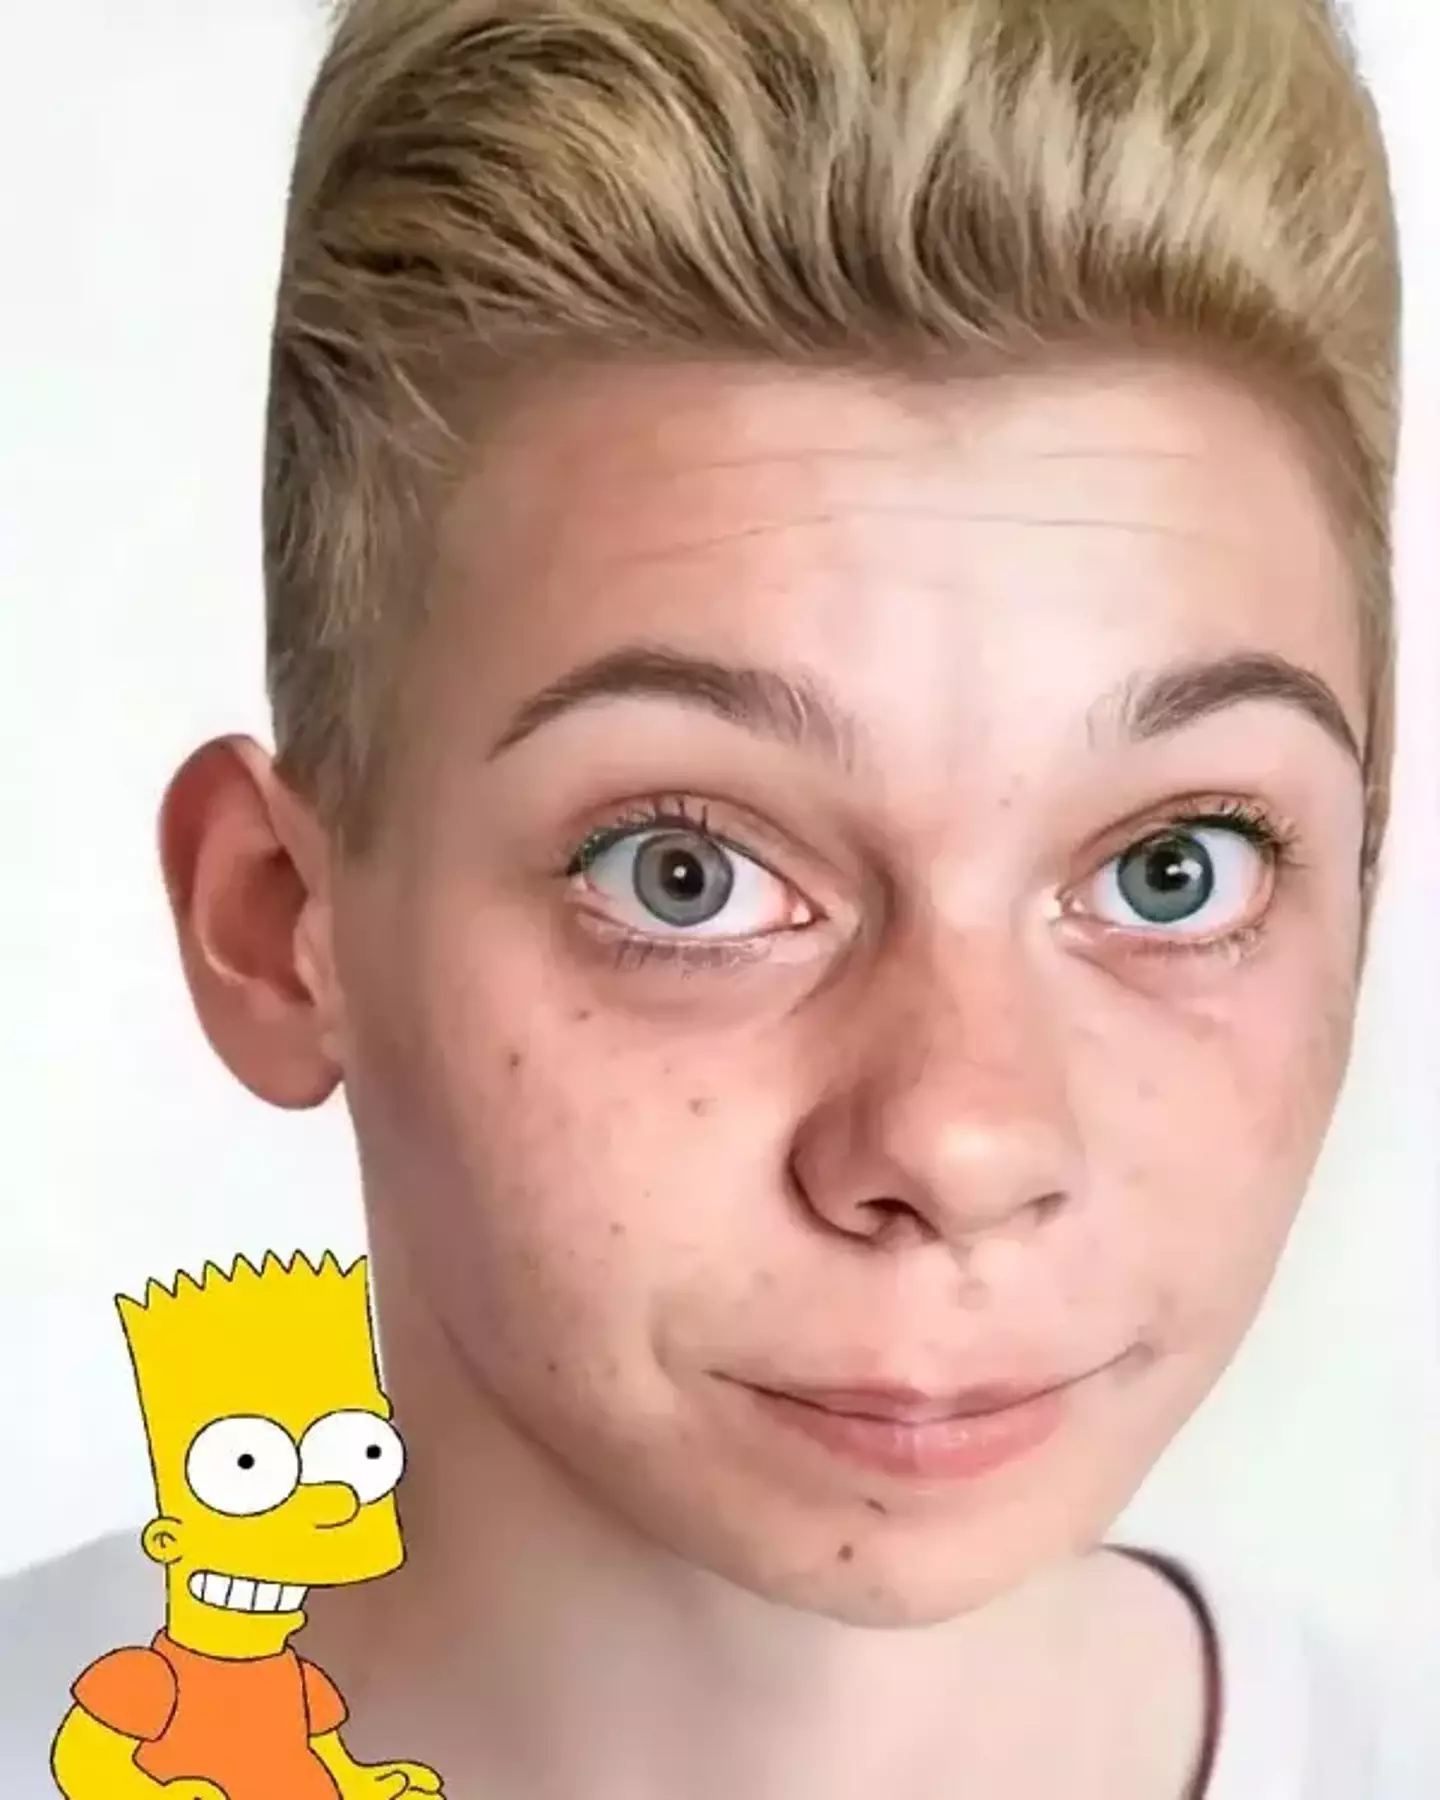 This is how Bart Simpson would look if he were real, apparently.